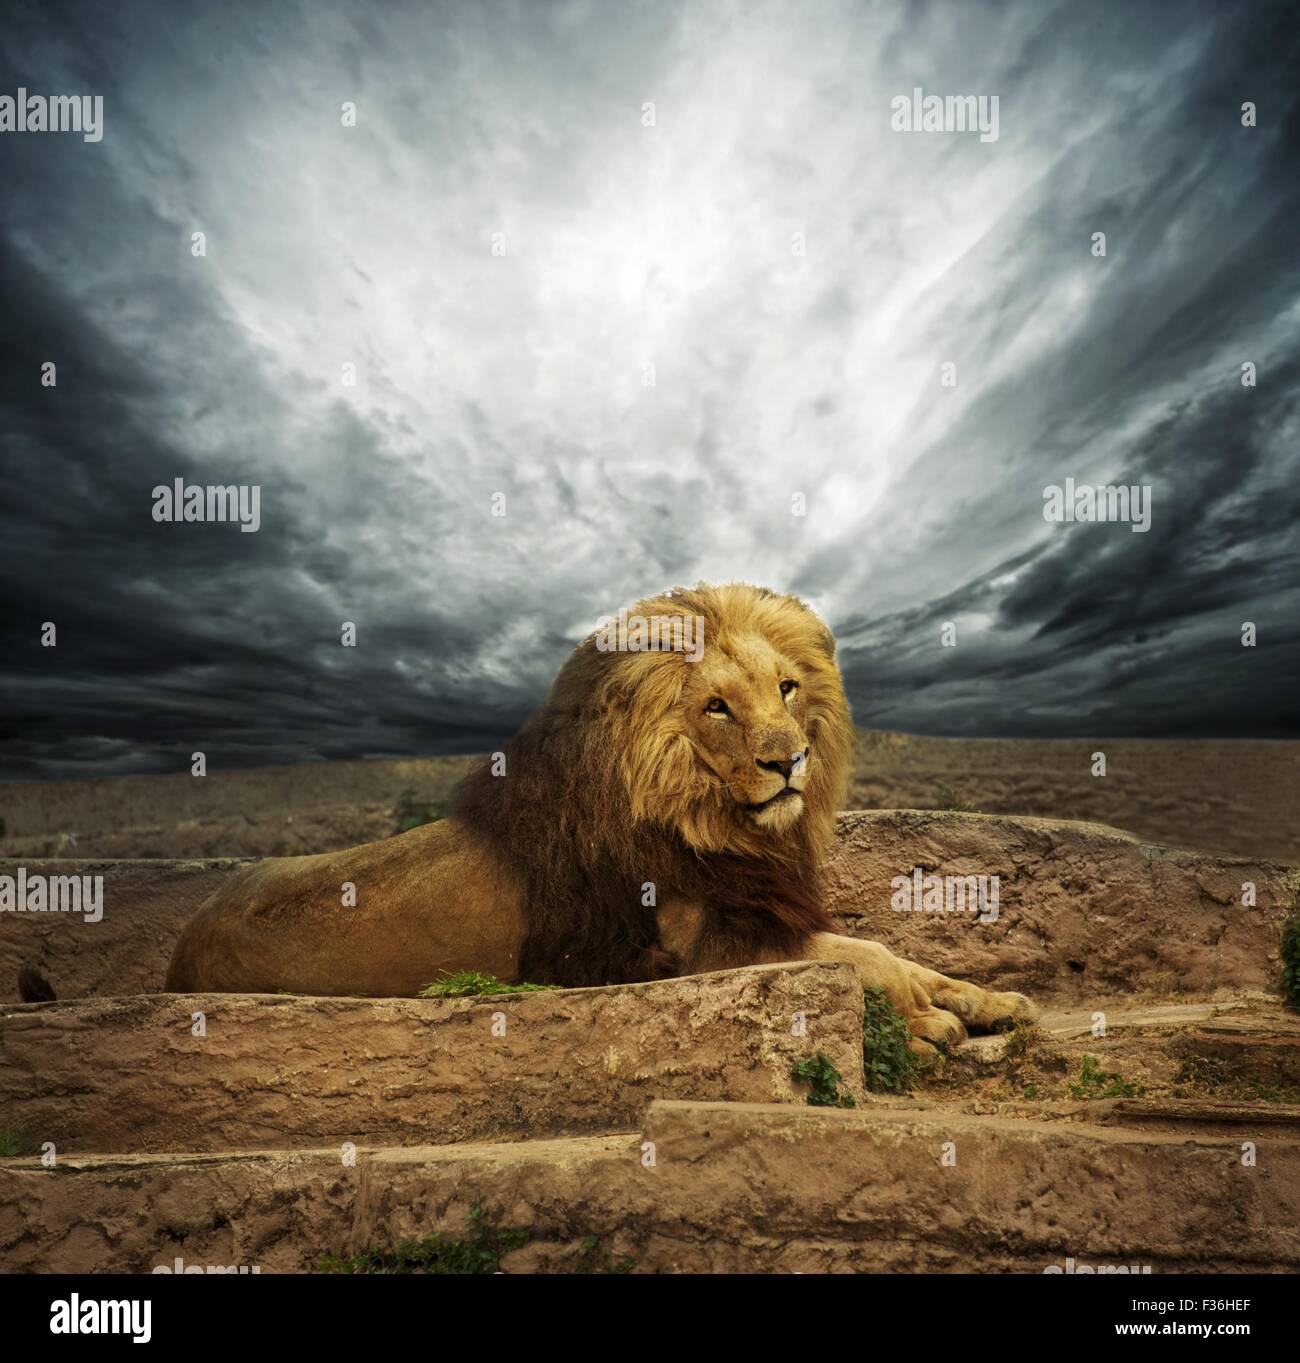 African lion in the desert Stock Photo